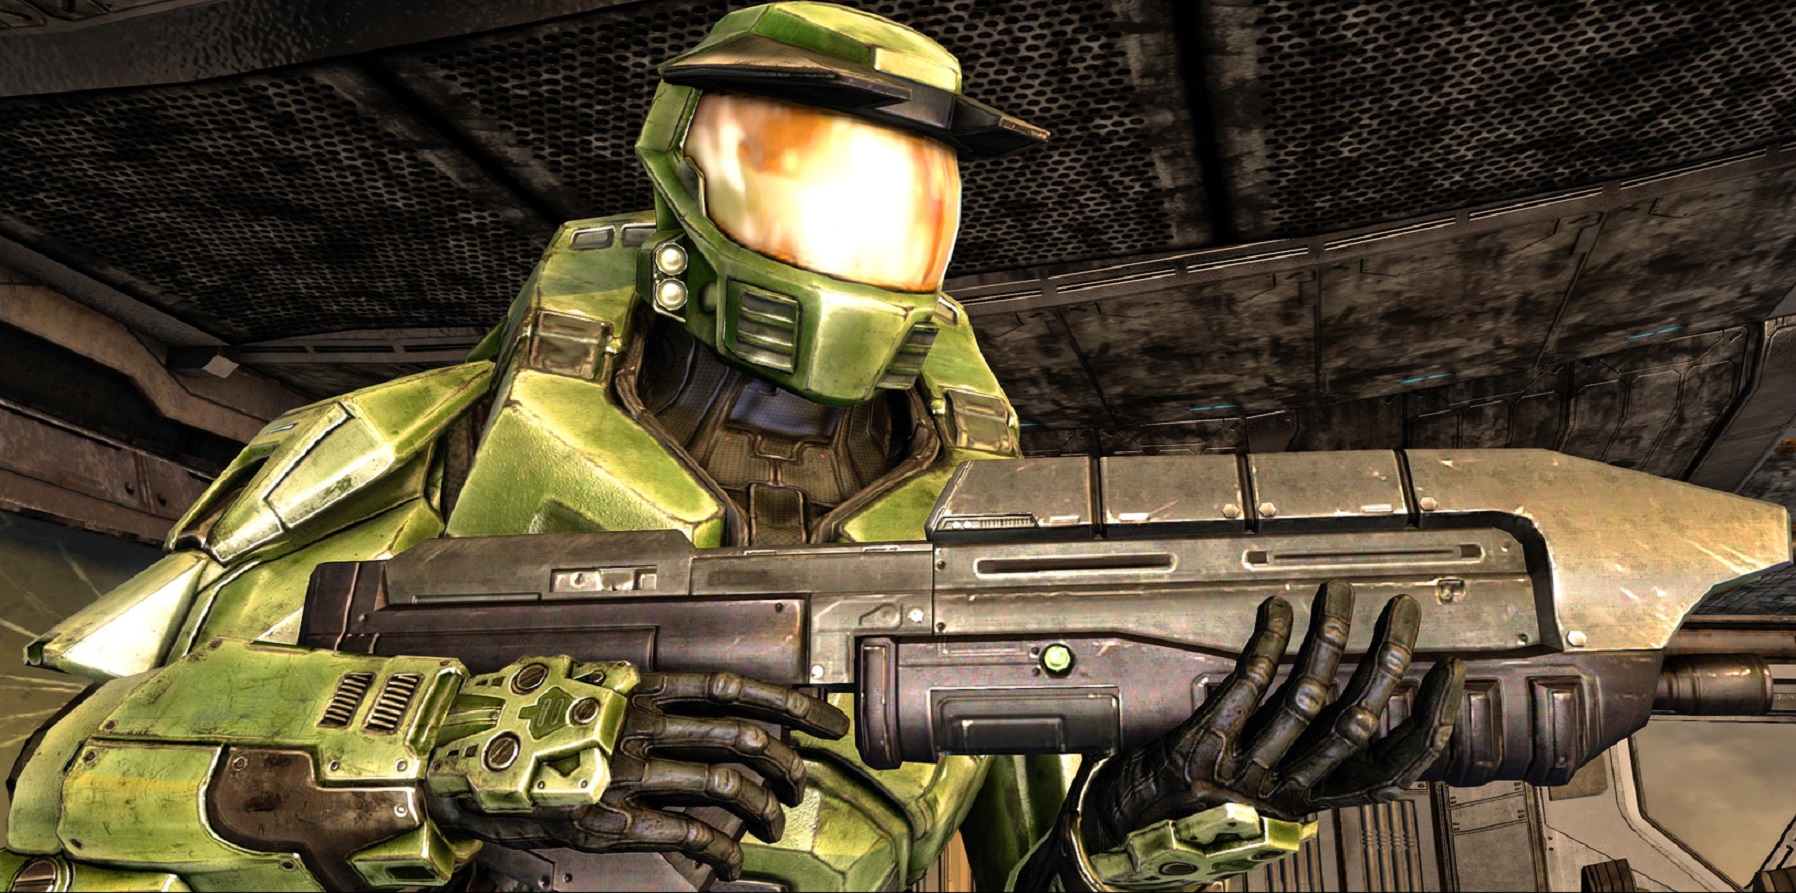 How long is Halo: Combat Evolved - Anniversary?